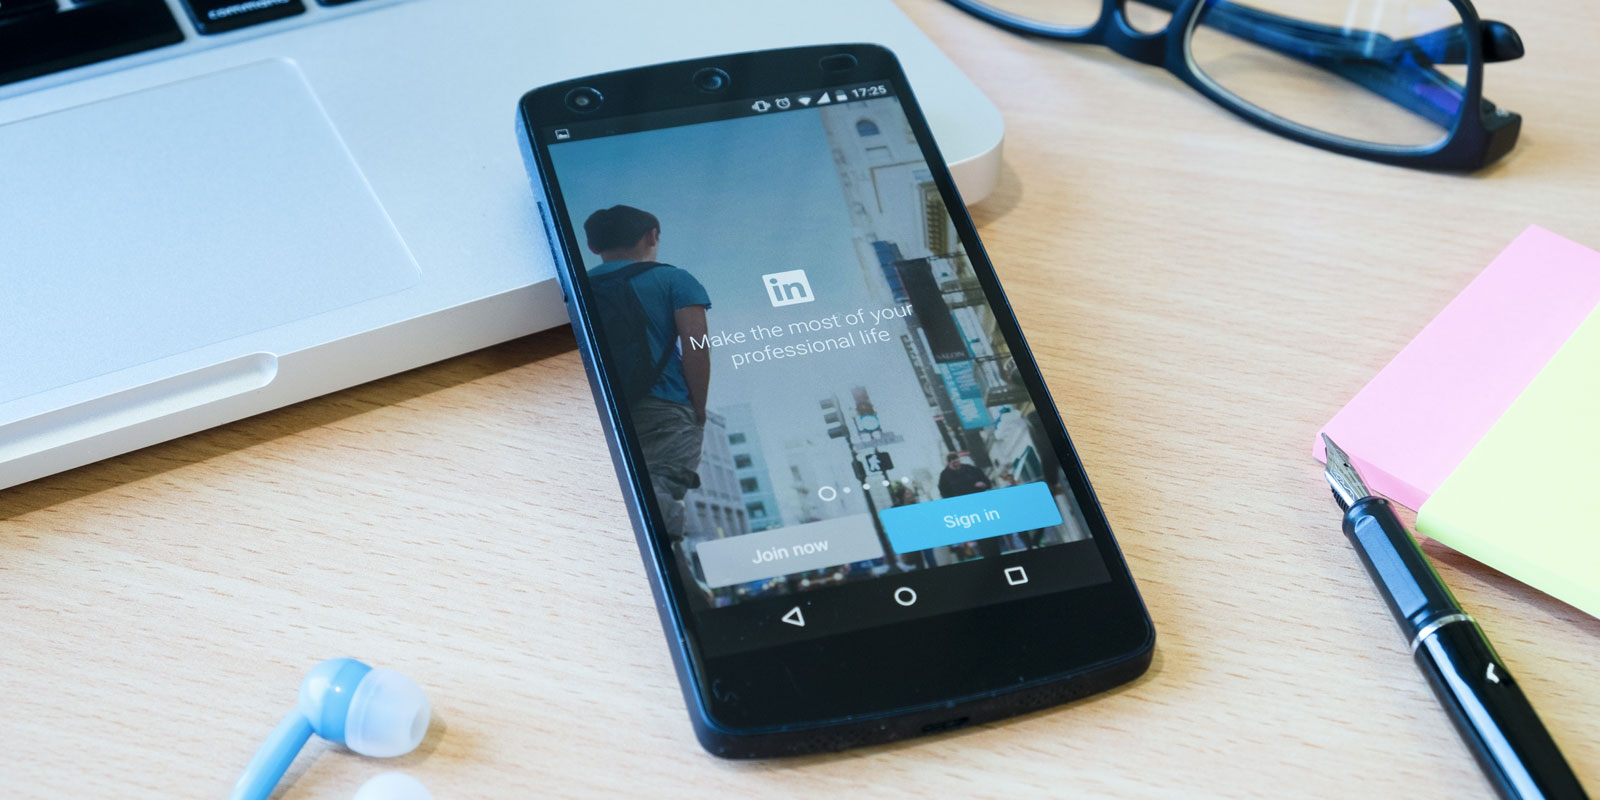 Everything You Need to Know About LinkedIn